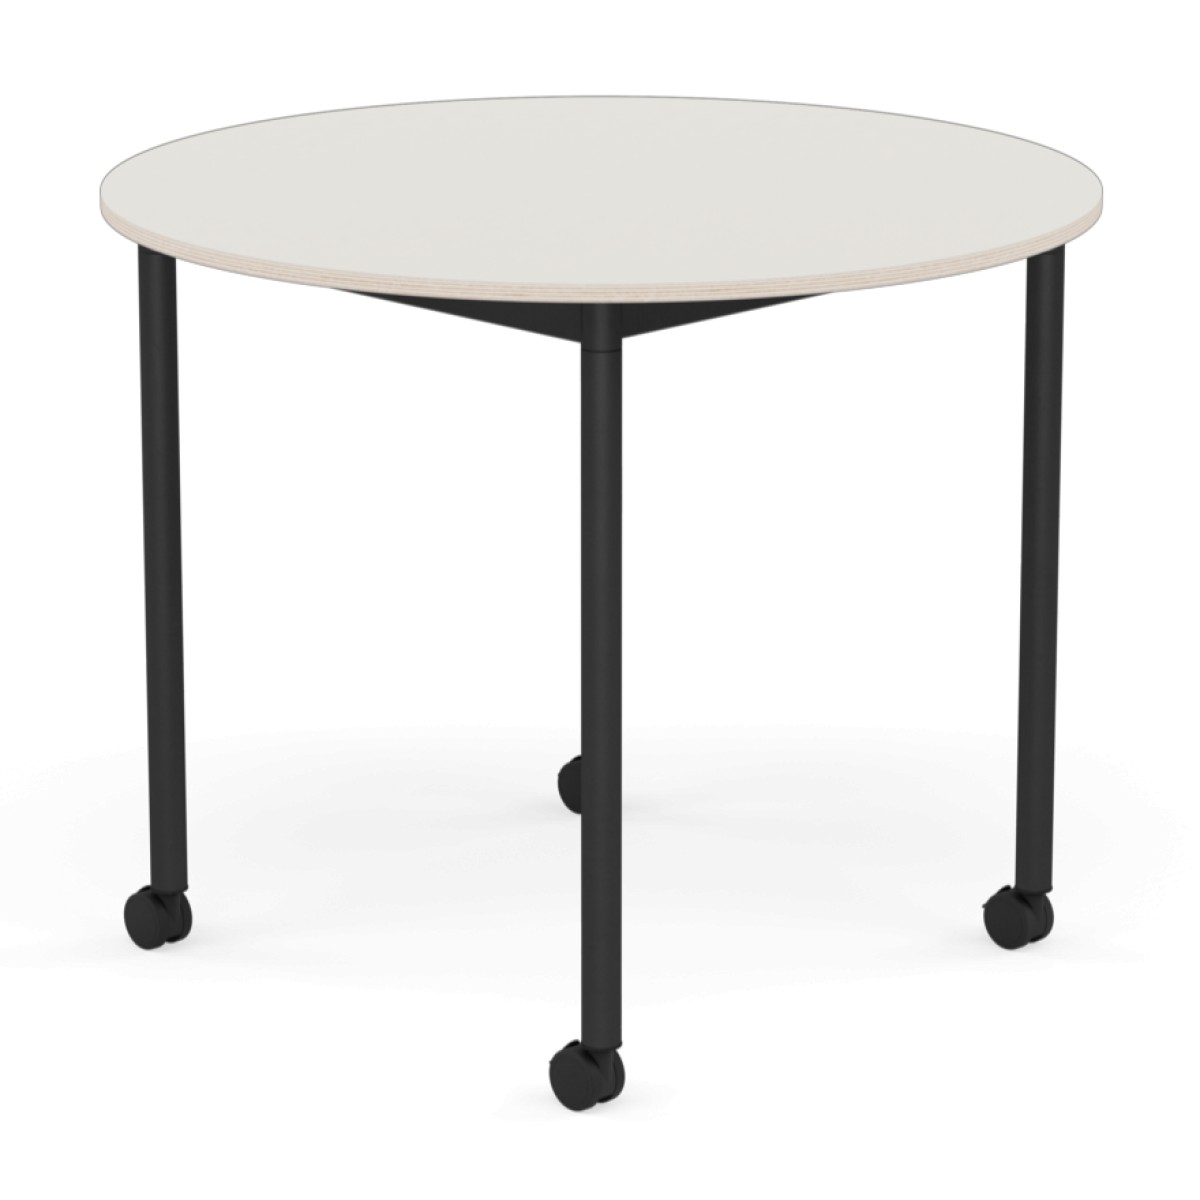 Base Table with Castors / Round